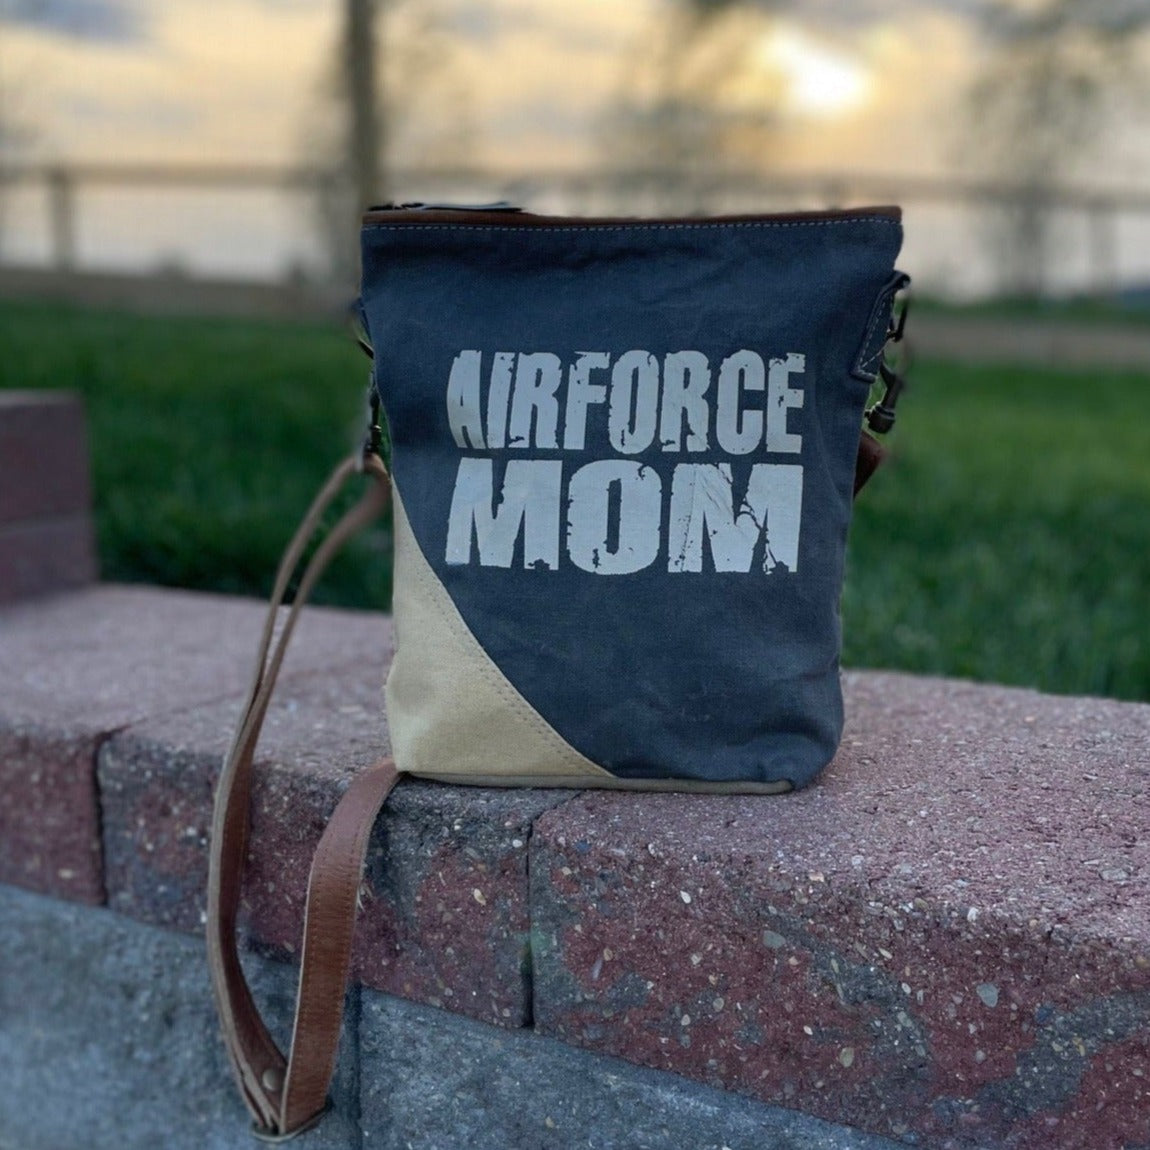 Air Force Mom Purse Crossbody Sustainable Canvas Bag - Air Force Proud! Great Gift for Mom!